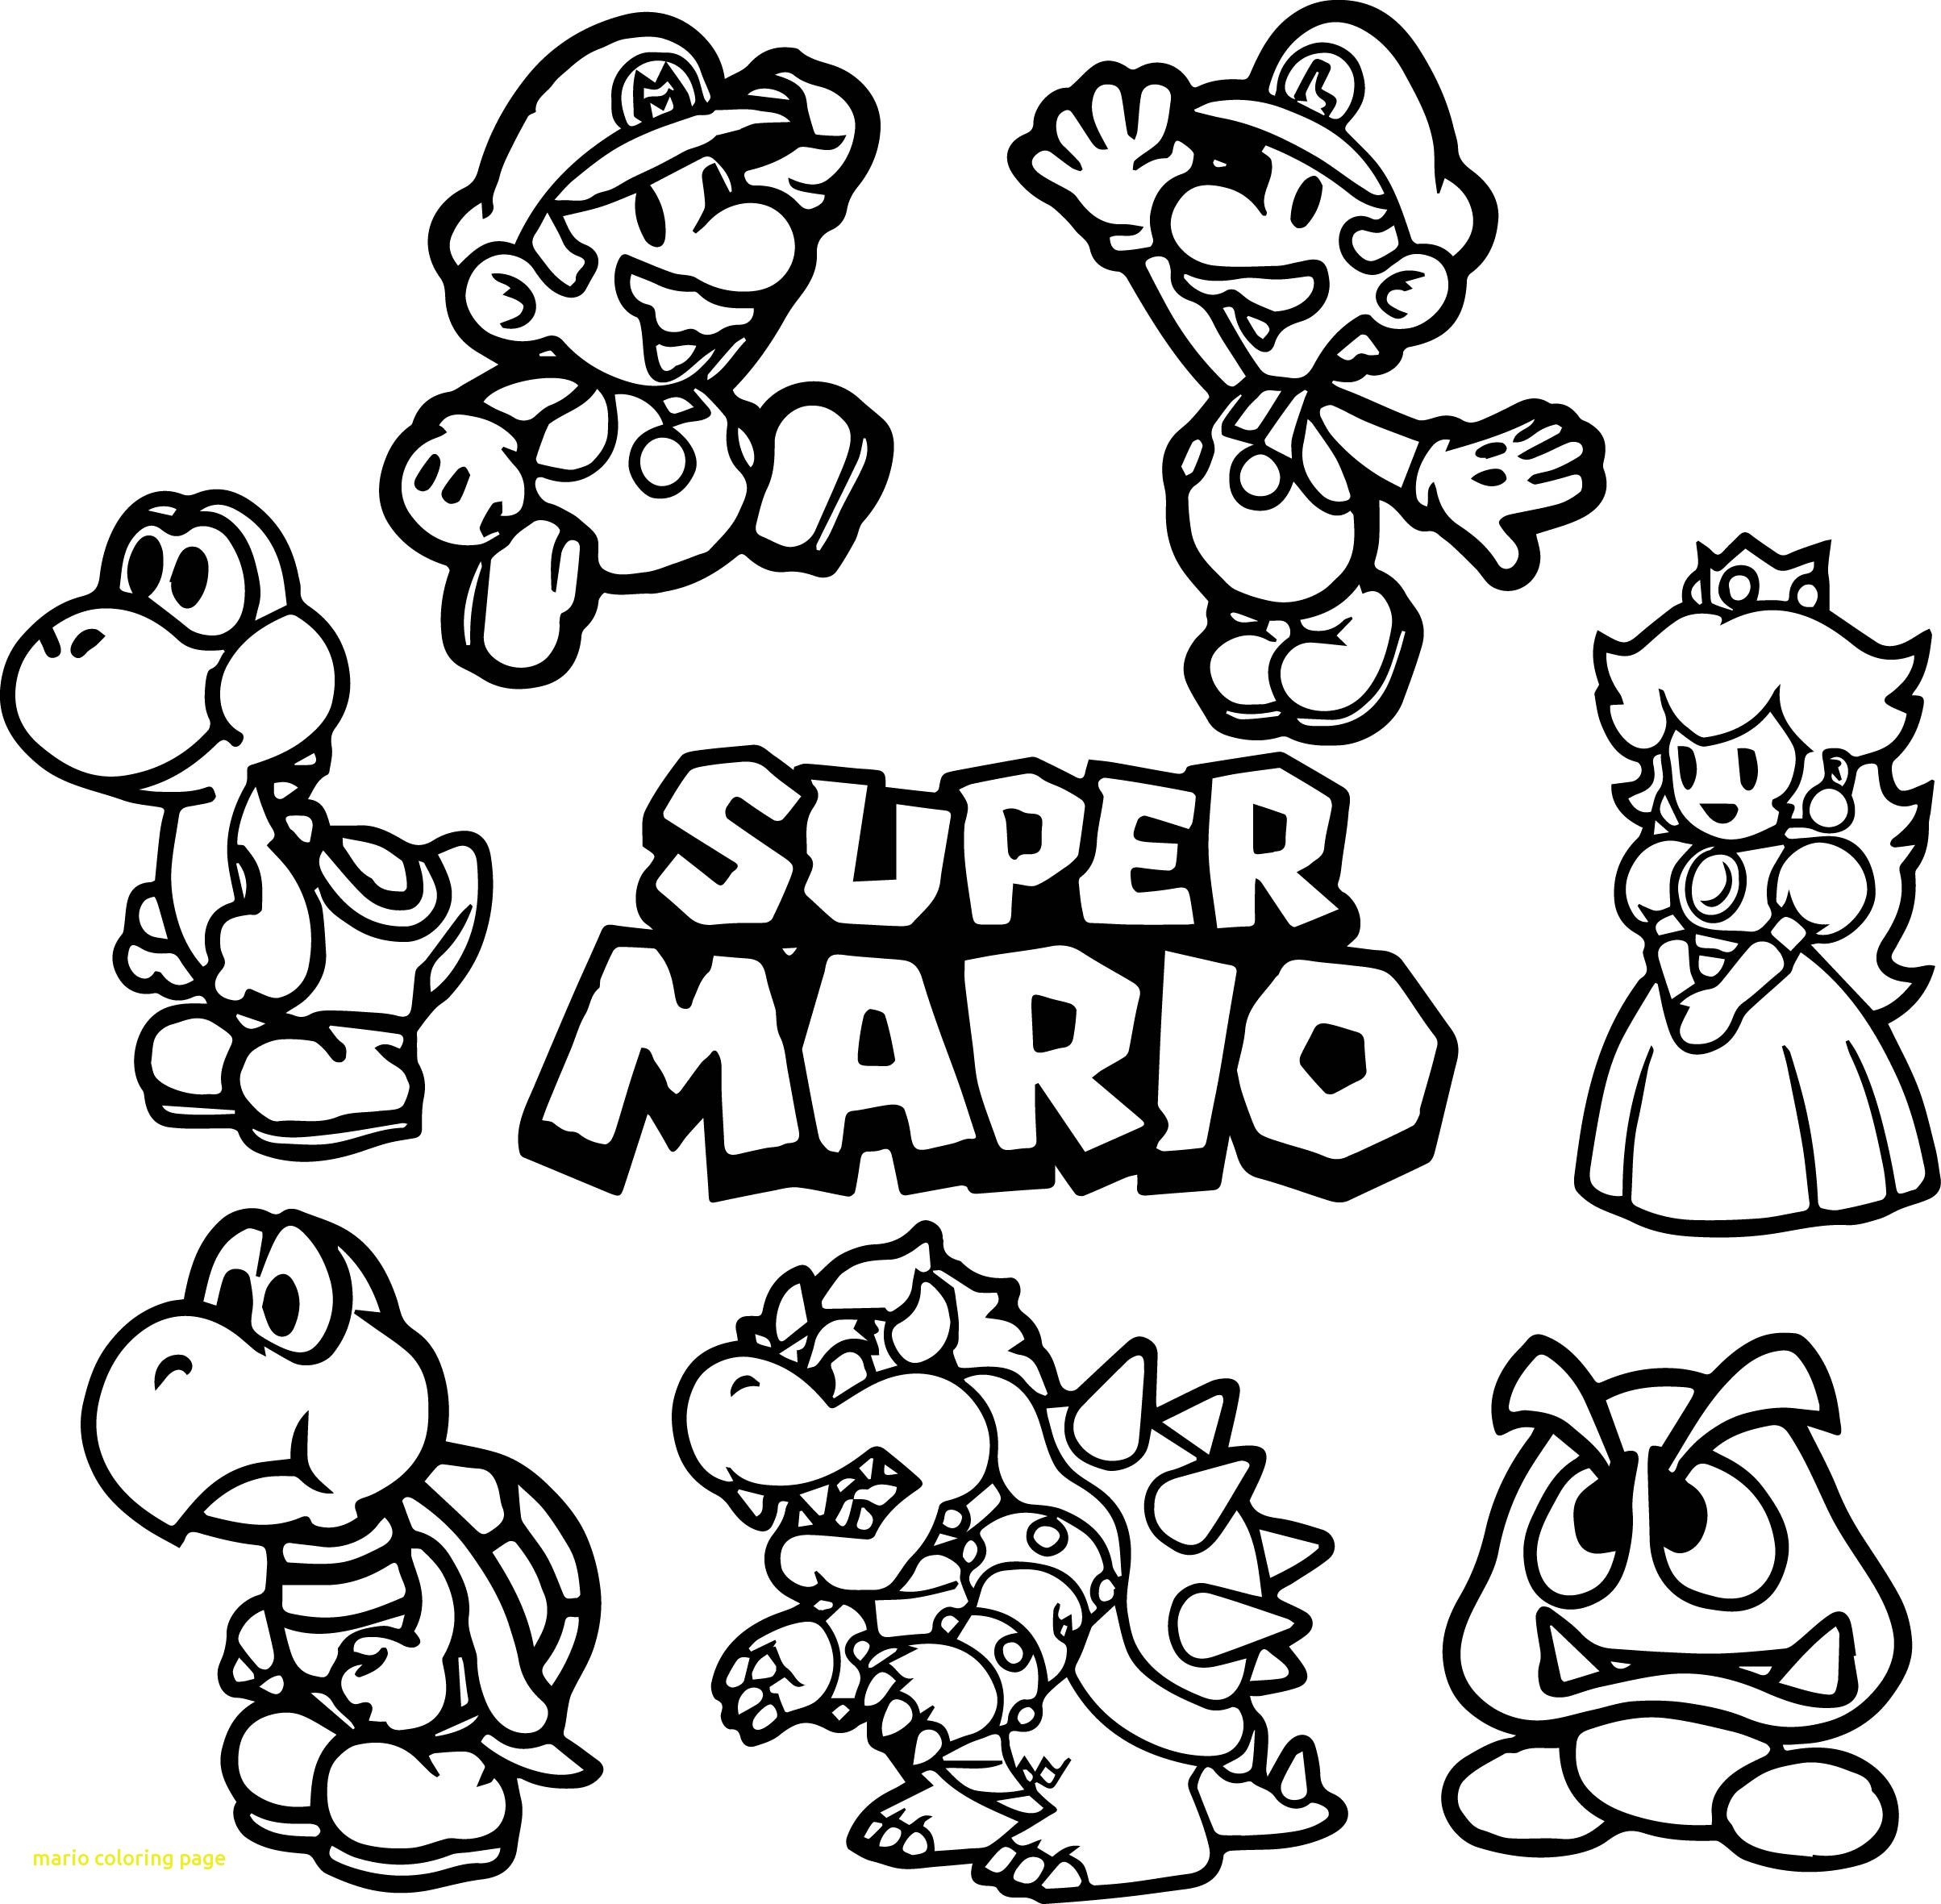 Mario Coloring Pages at GetColorings.com | Free printable colorings